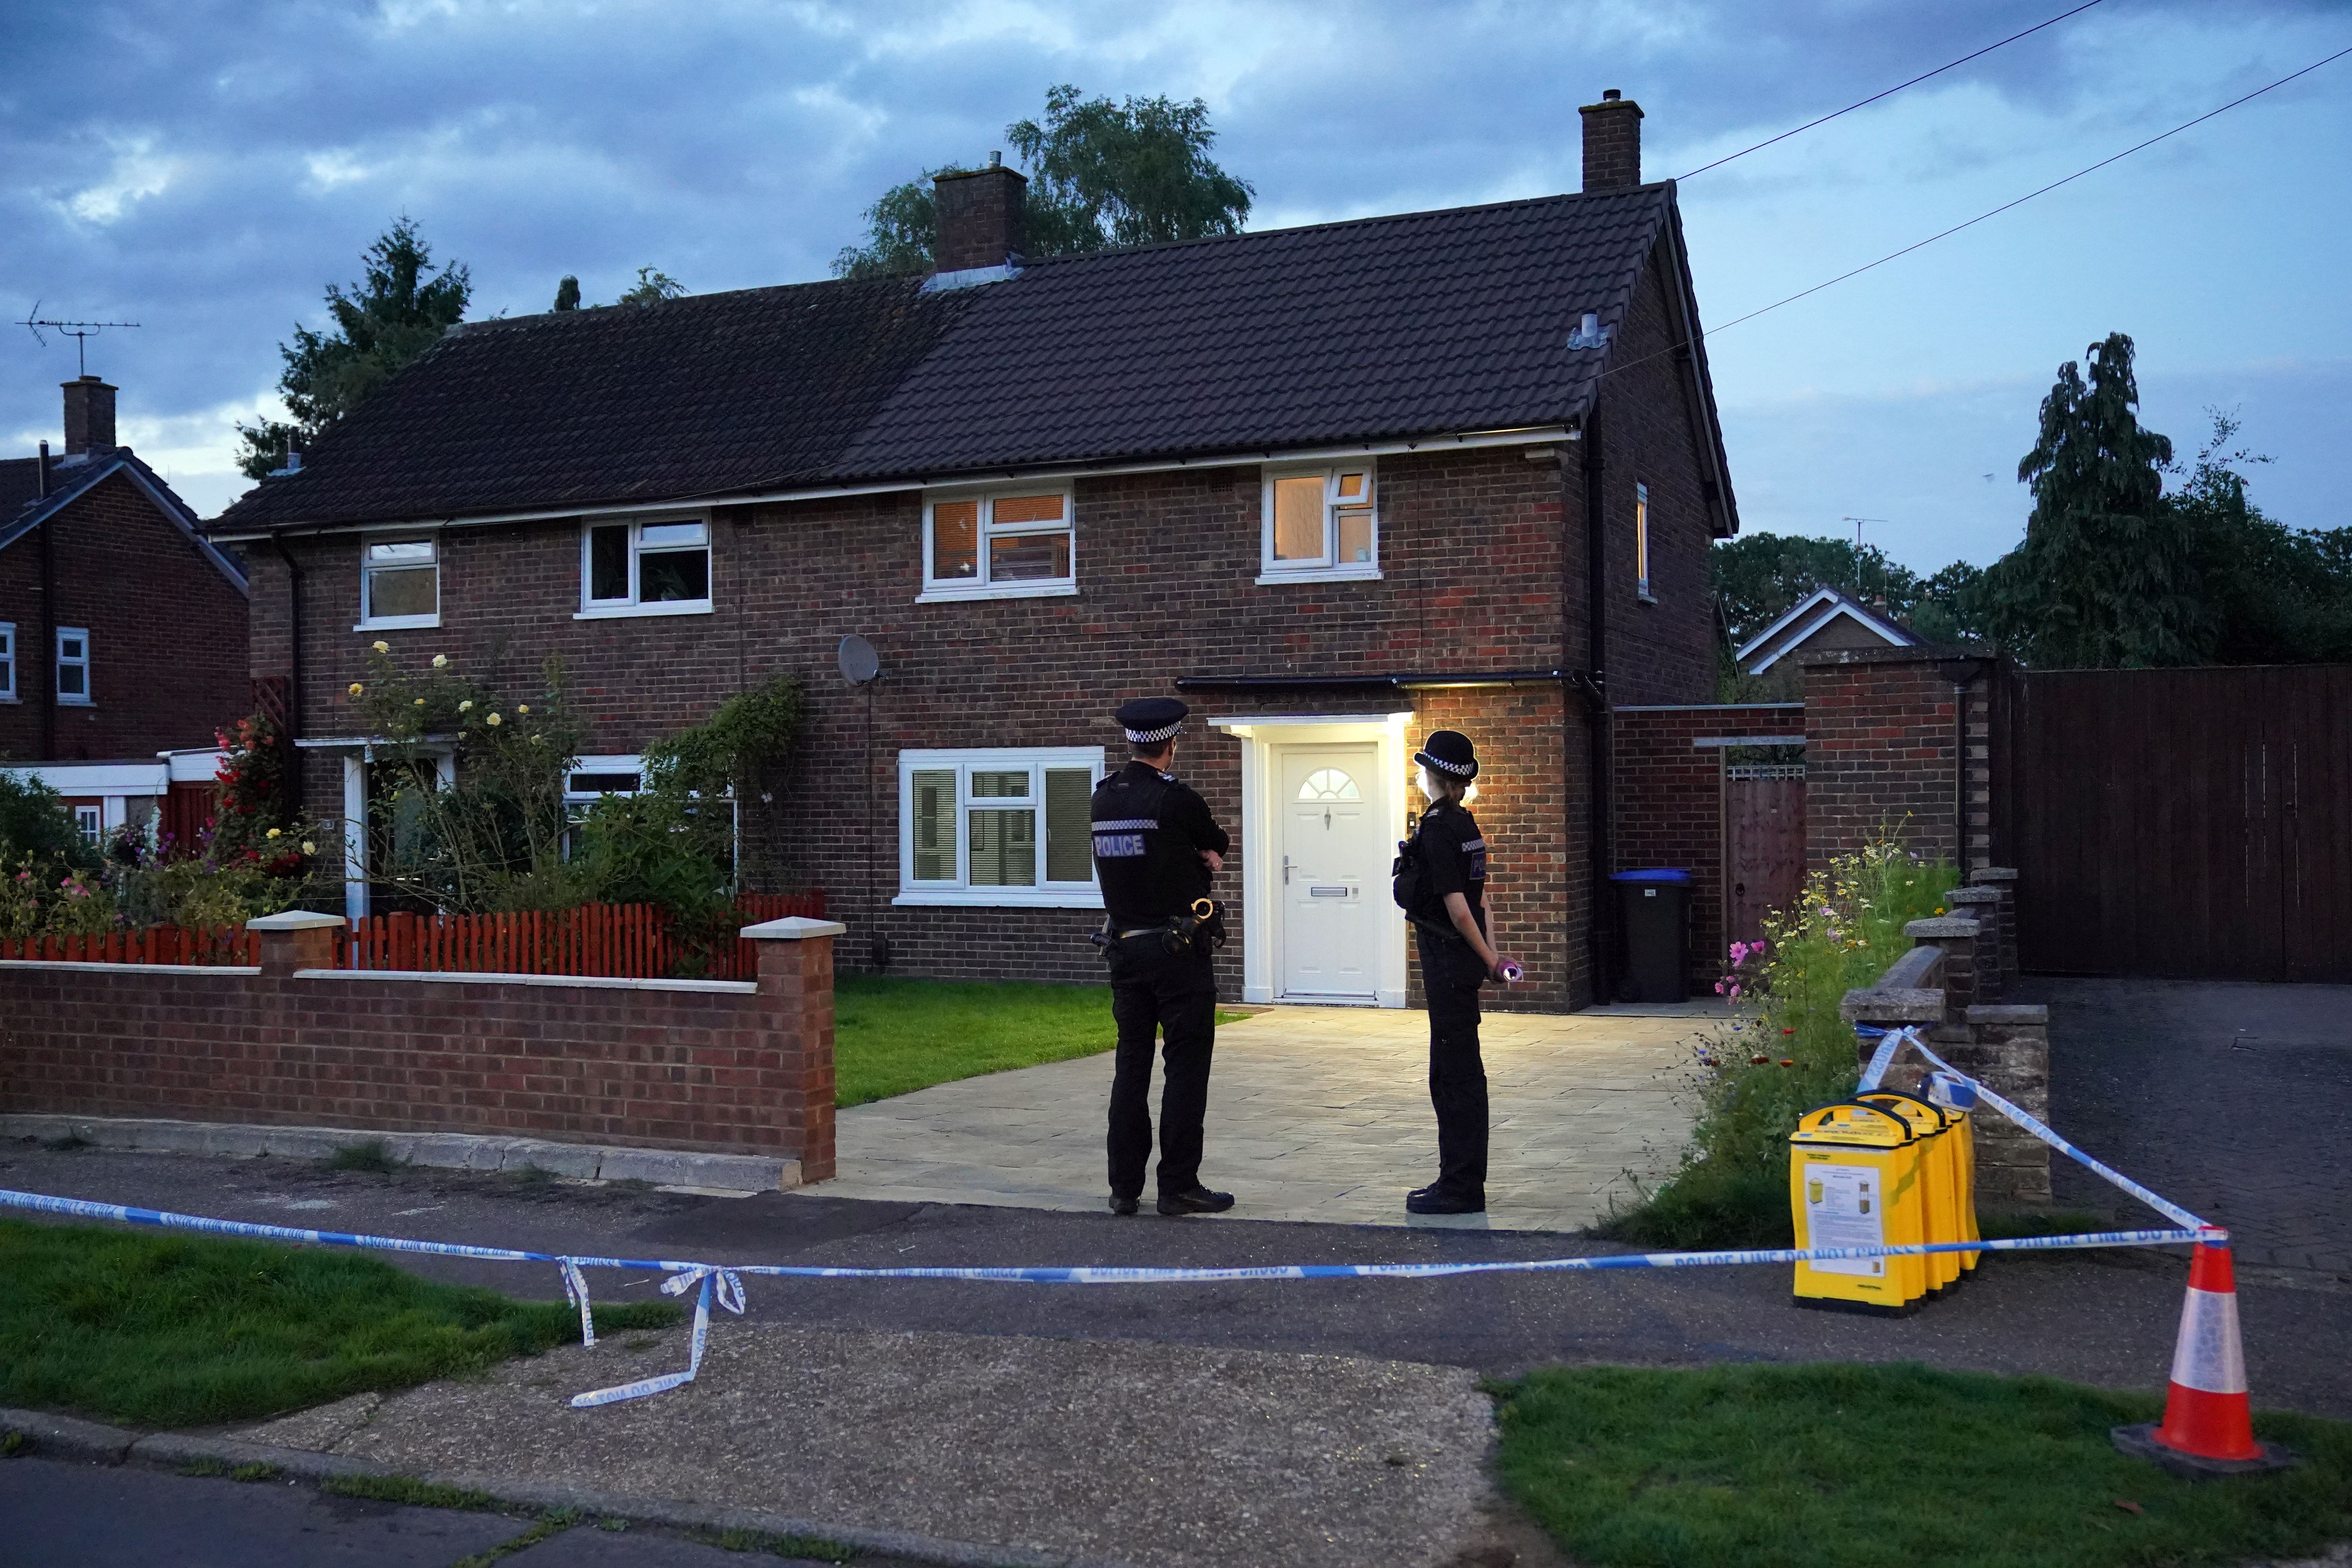 Police discovered the 10-year-old girl at a property in Woking (Jonathan Brady/PA)